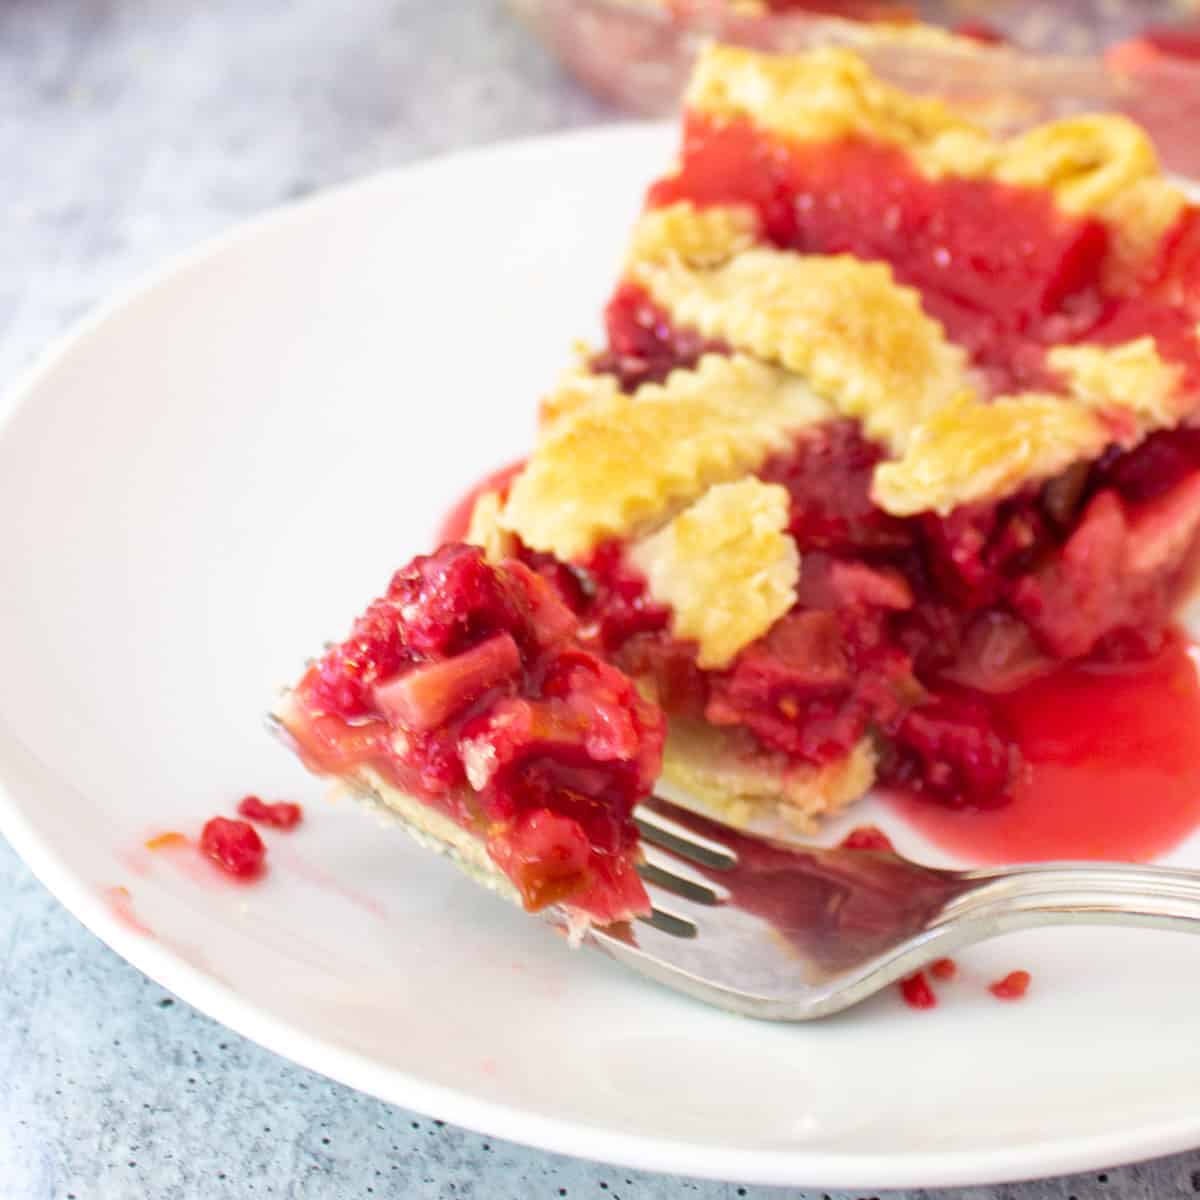 A slice of raspberry rhubarb pie with a bite of the pie on a fork.